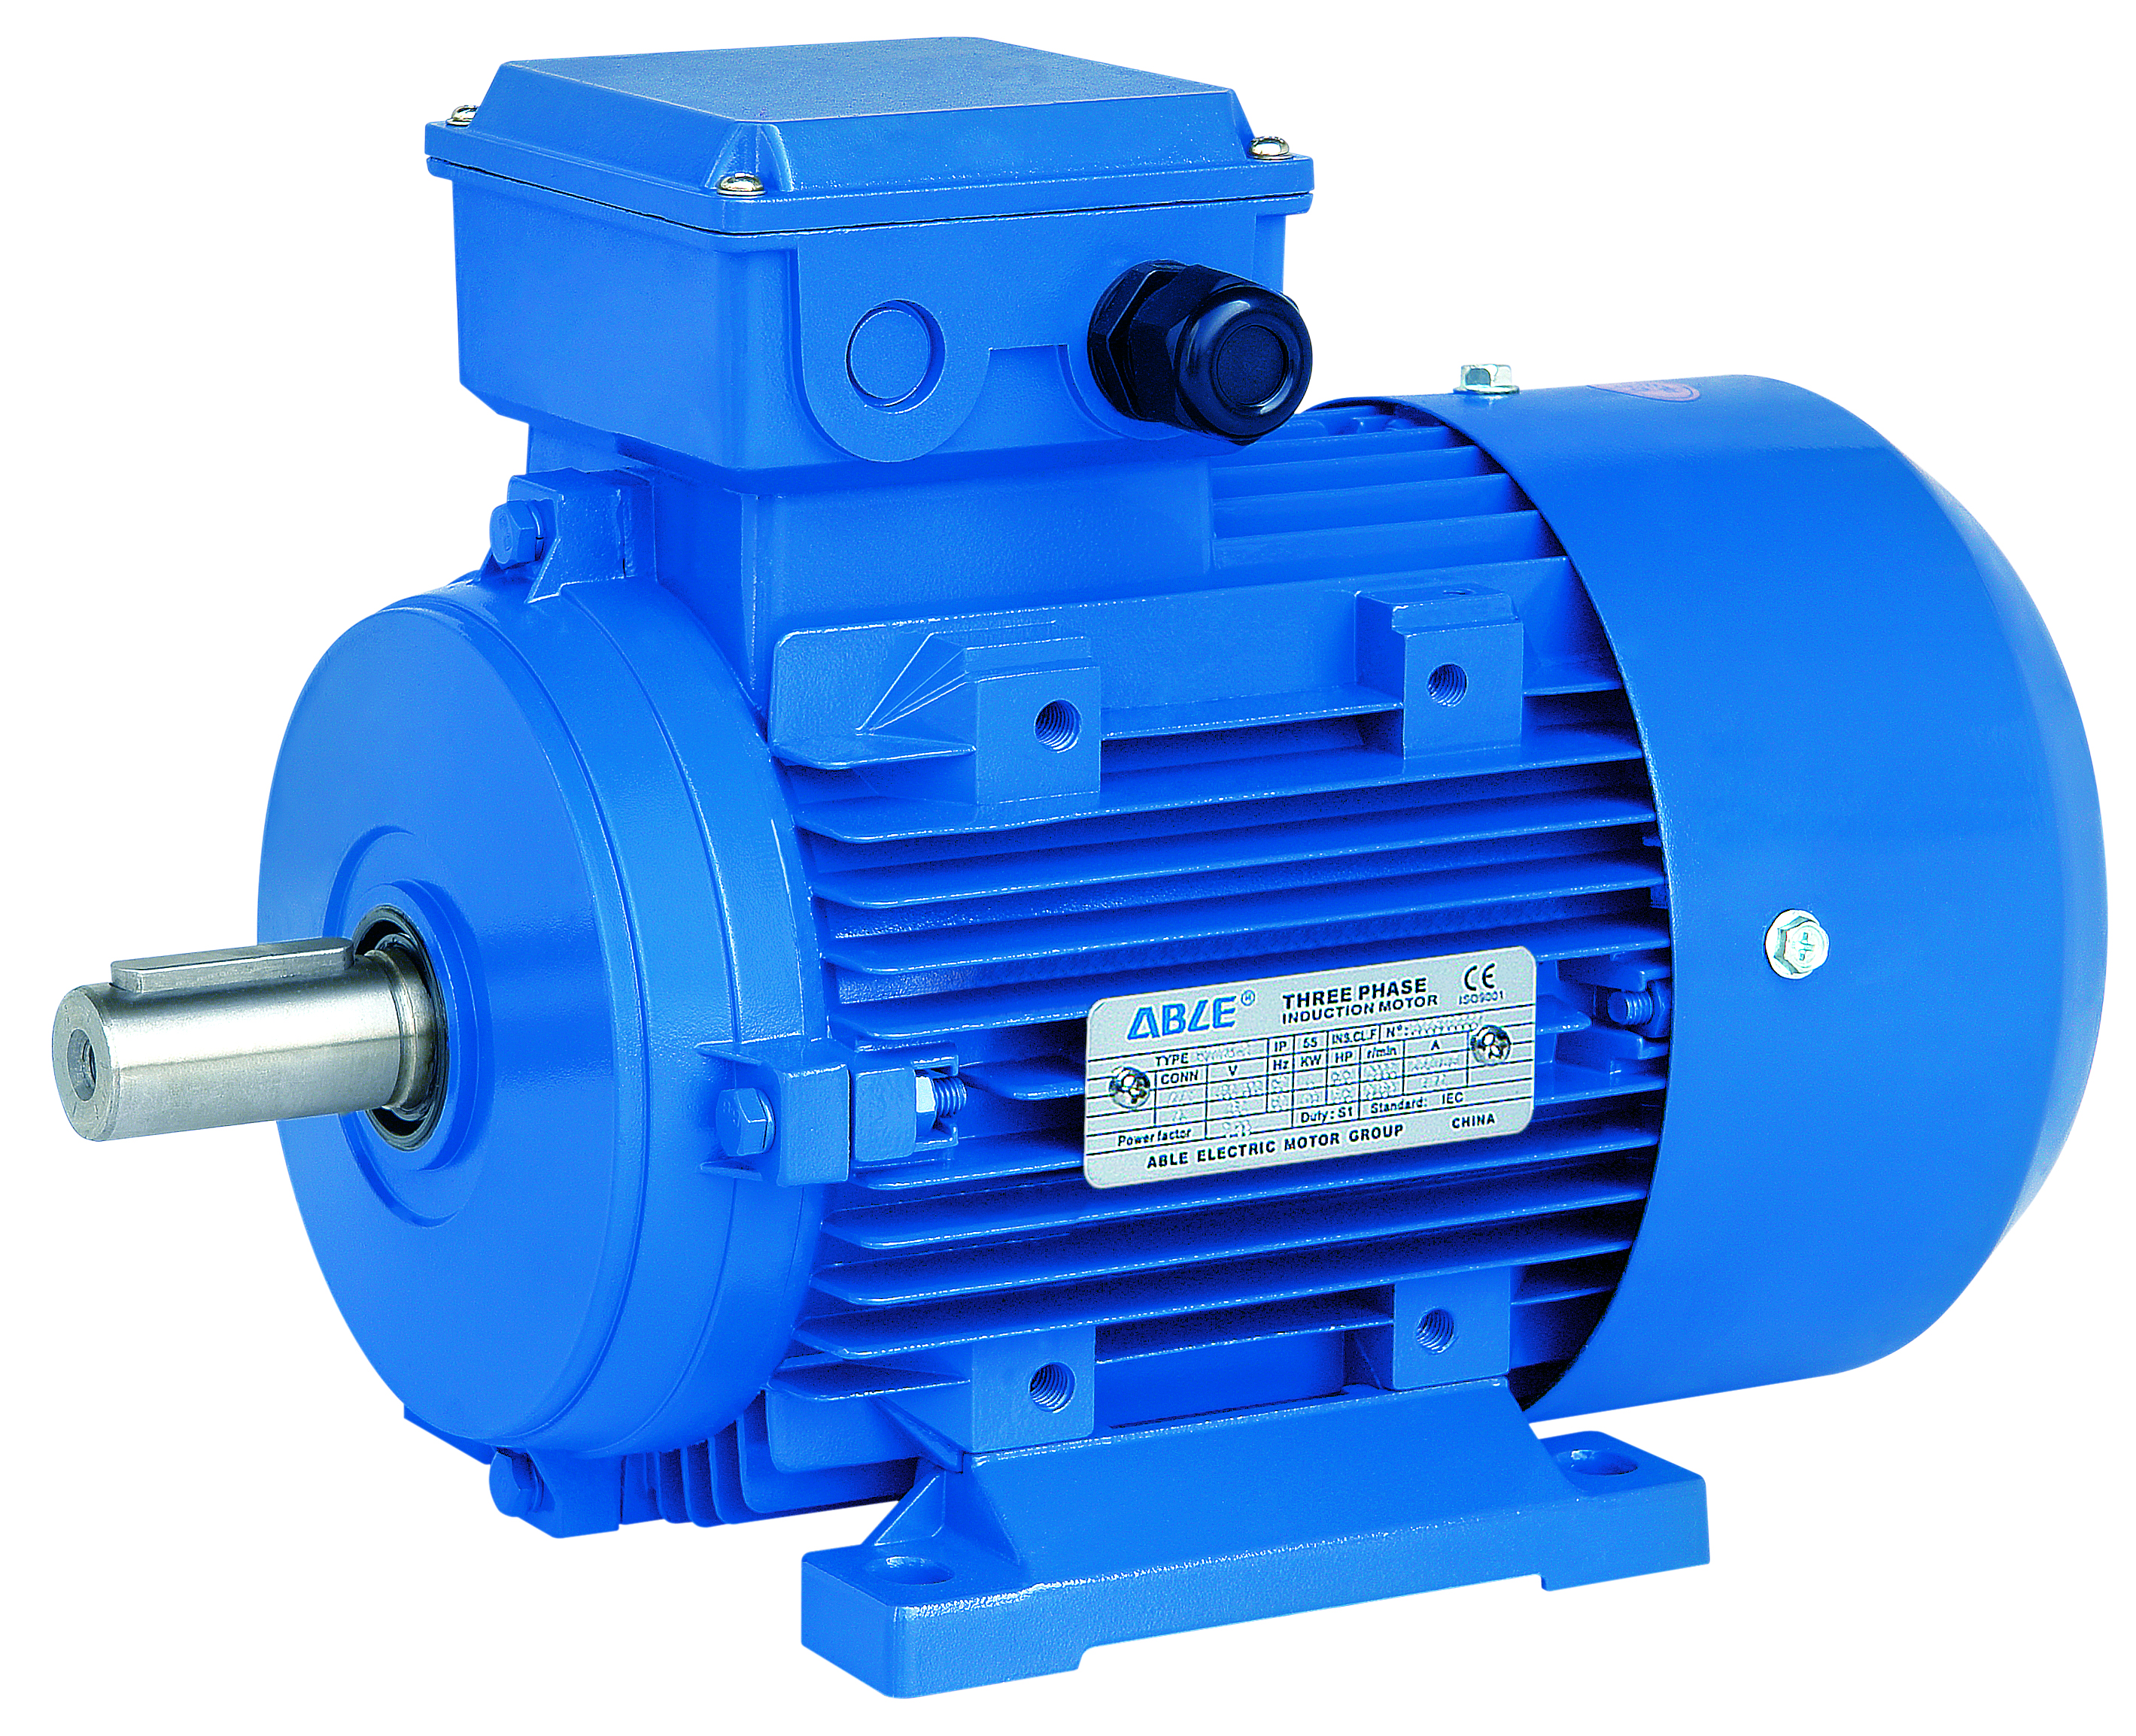 MS Series Three Phase Induction Motor